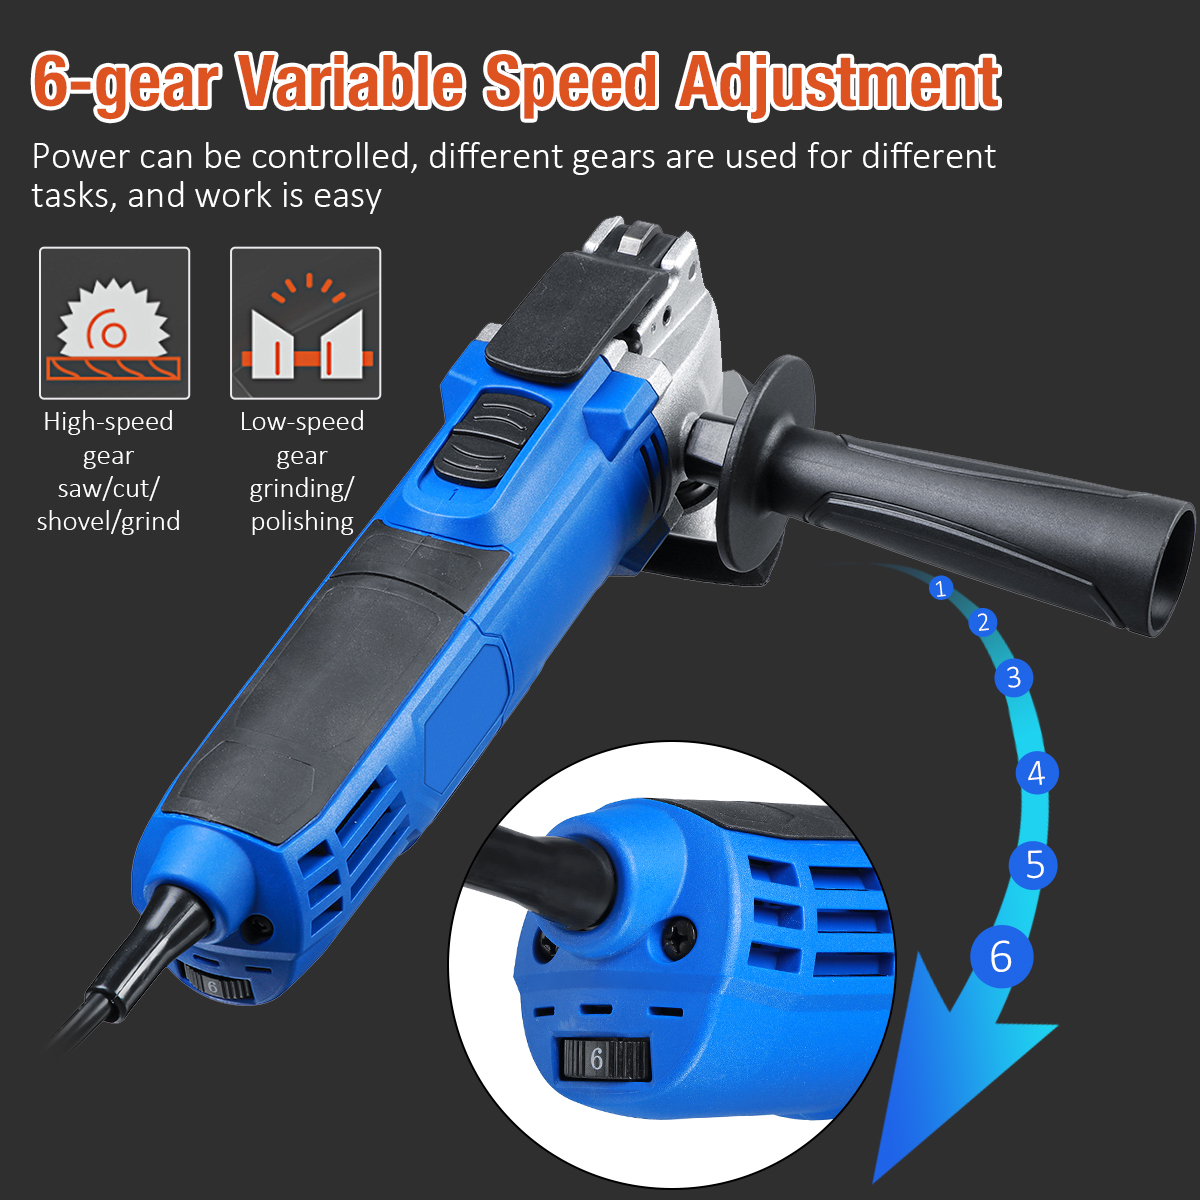 220V-Electric-Polisher-Cutter-Trimmer-Electric-Saw-Renovator-Tool-Woodworking-Oscillating-Tool-1800975-2